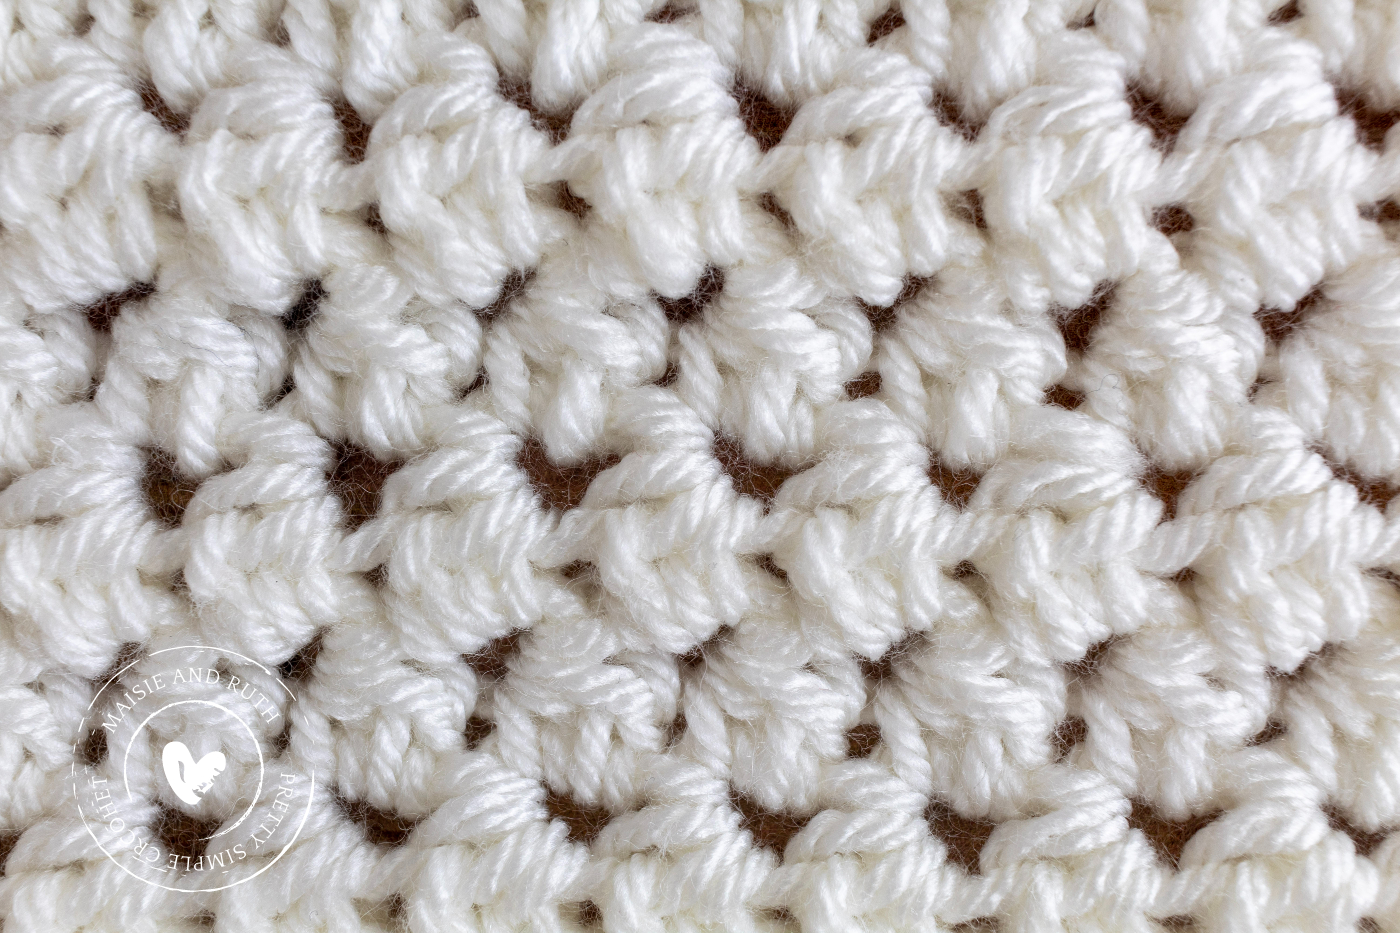 Crochet an Easy Baby Blanket close up of pique stitch